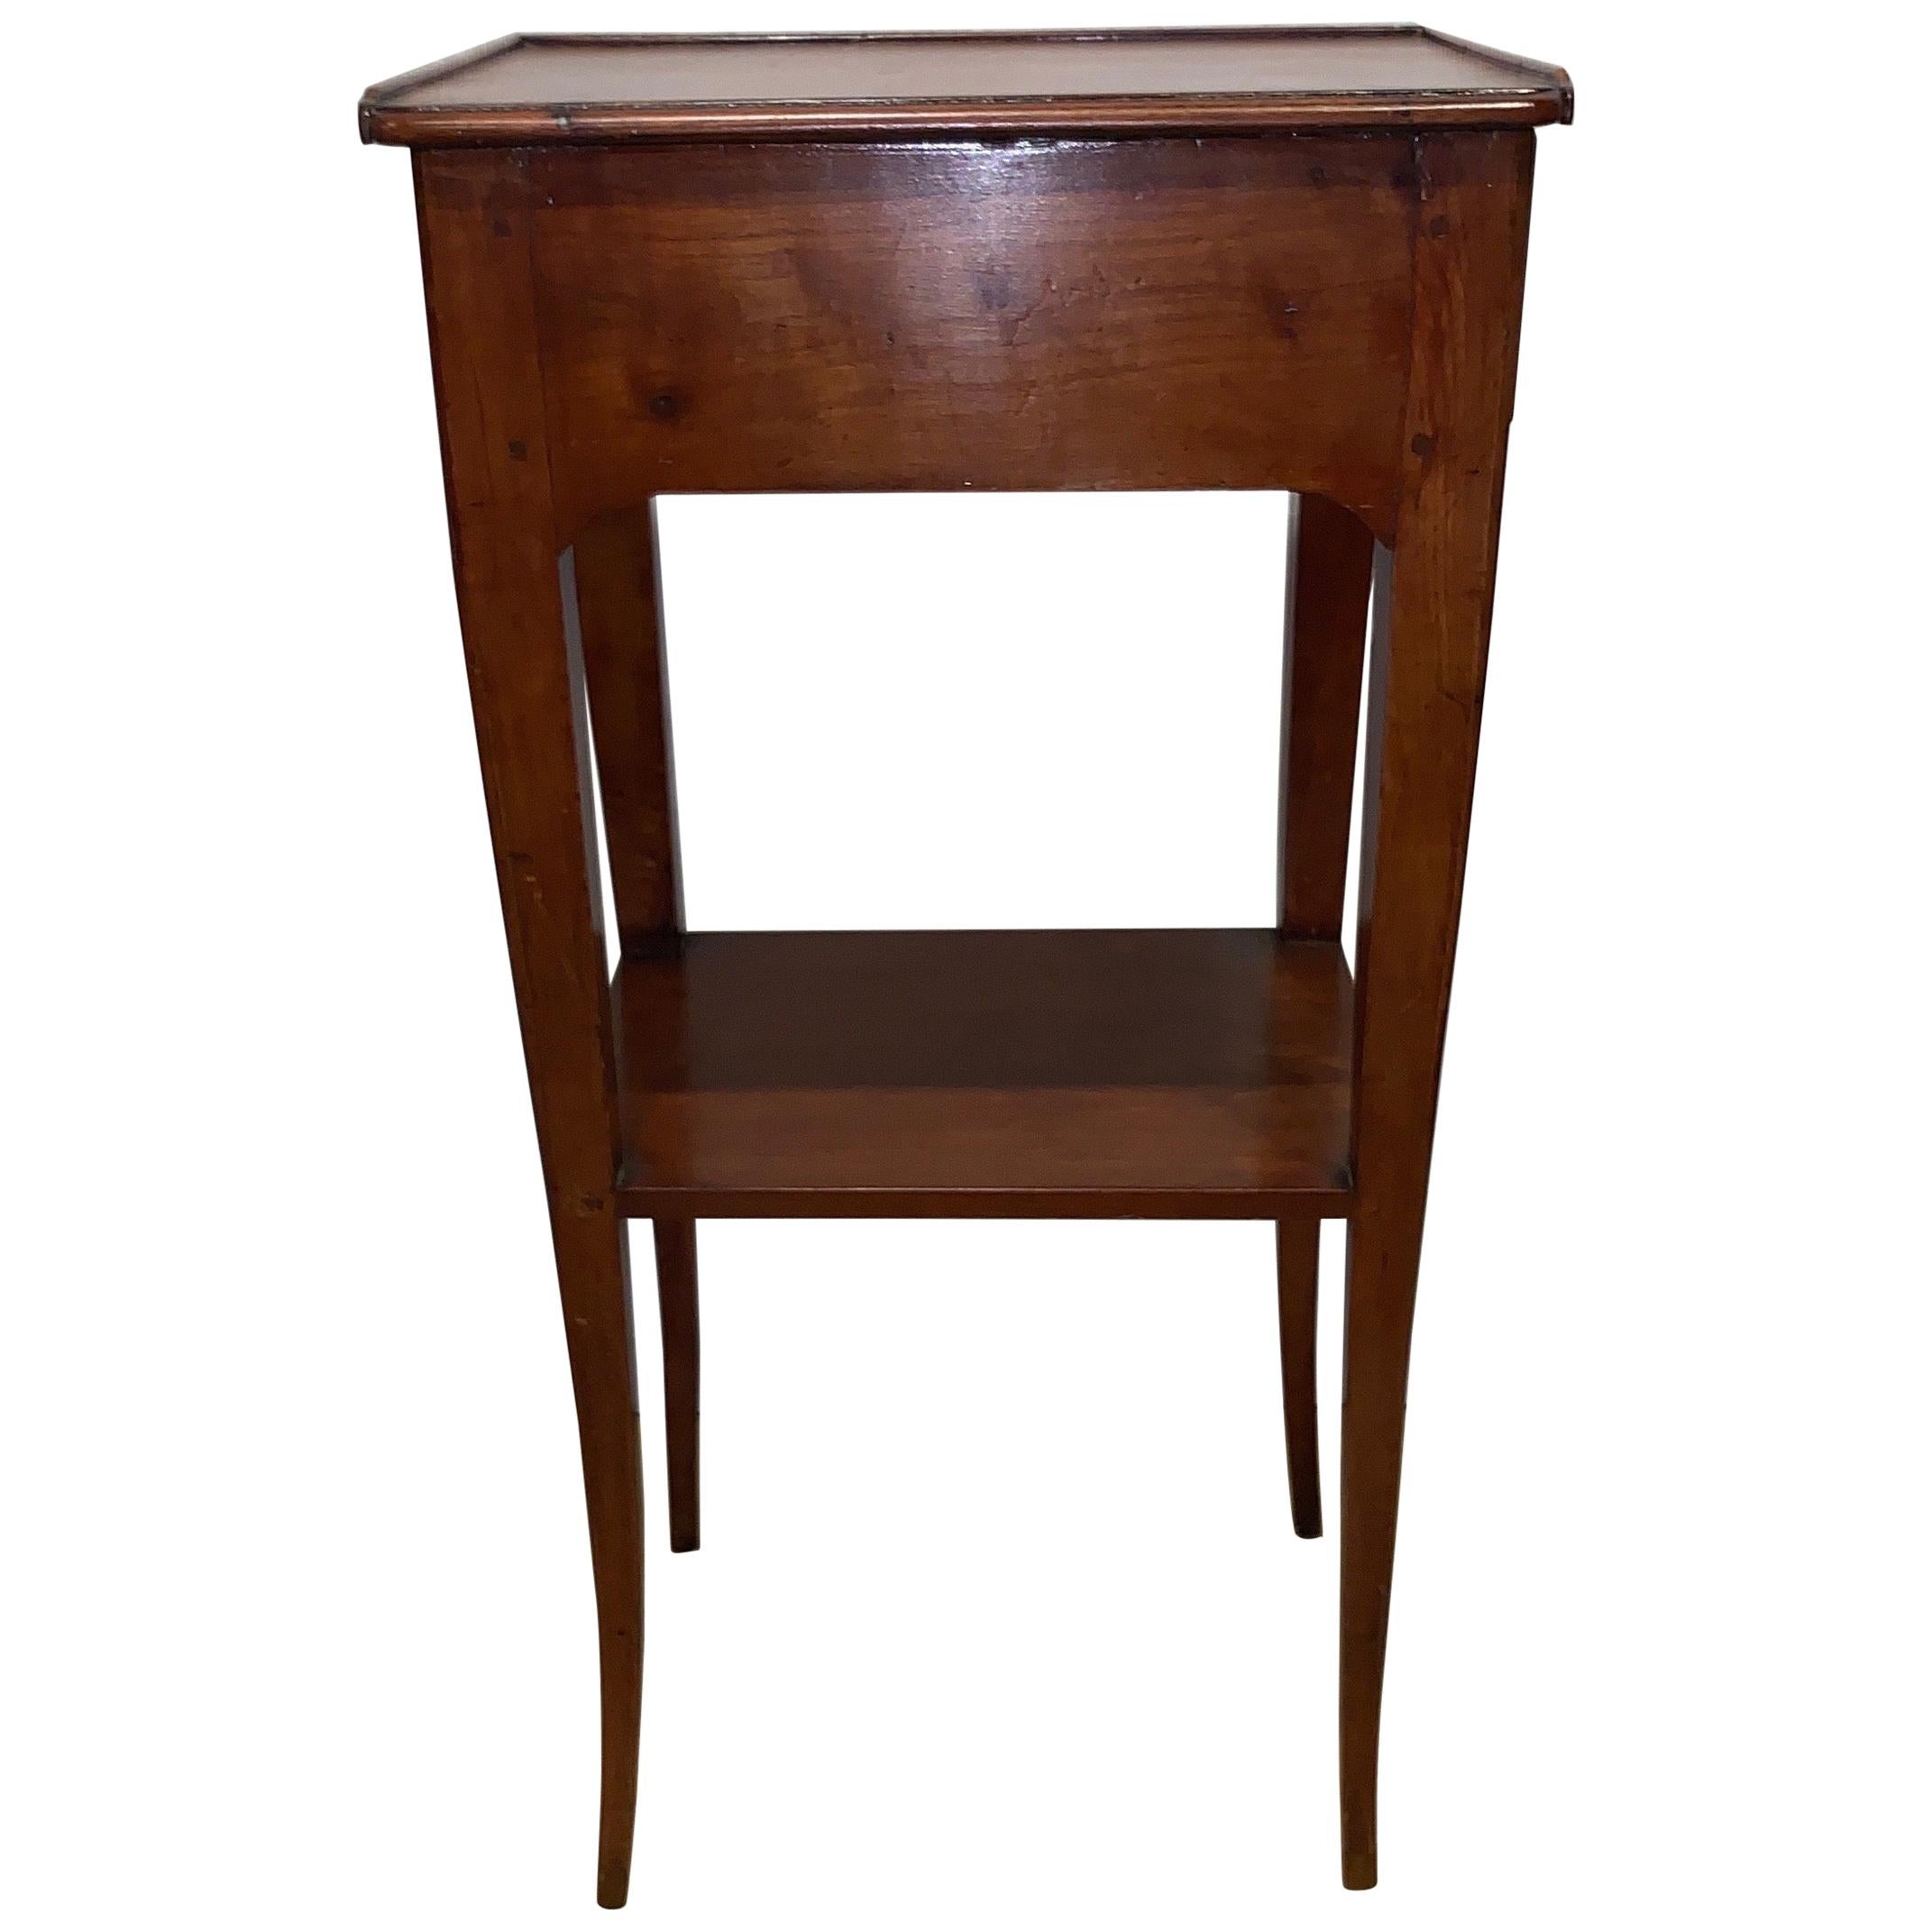 19th Century French Provincial Walnut Diminutive Side Table